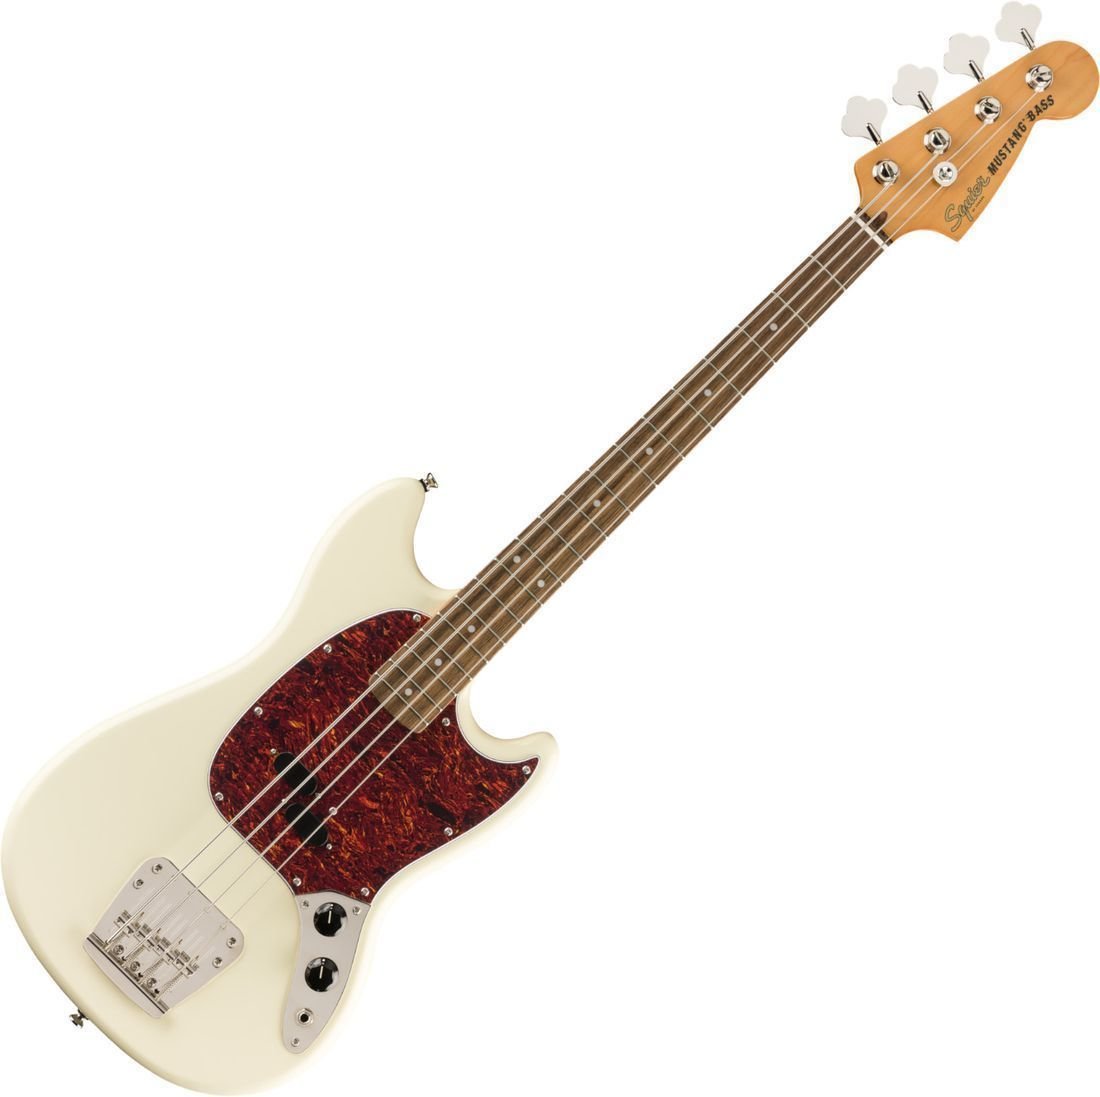 4-string Bassguitar Fender Squier Classic Vibe 60s Mustang Bass LRL Olympic White (Damaged)